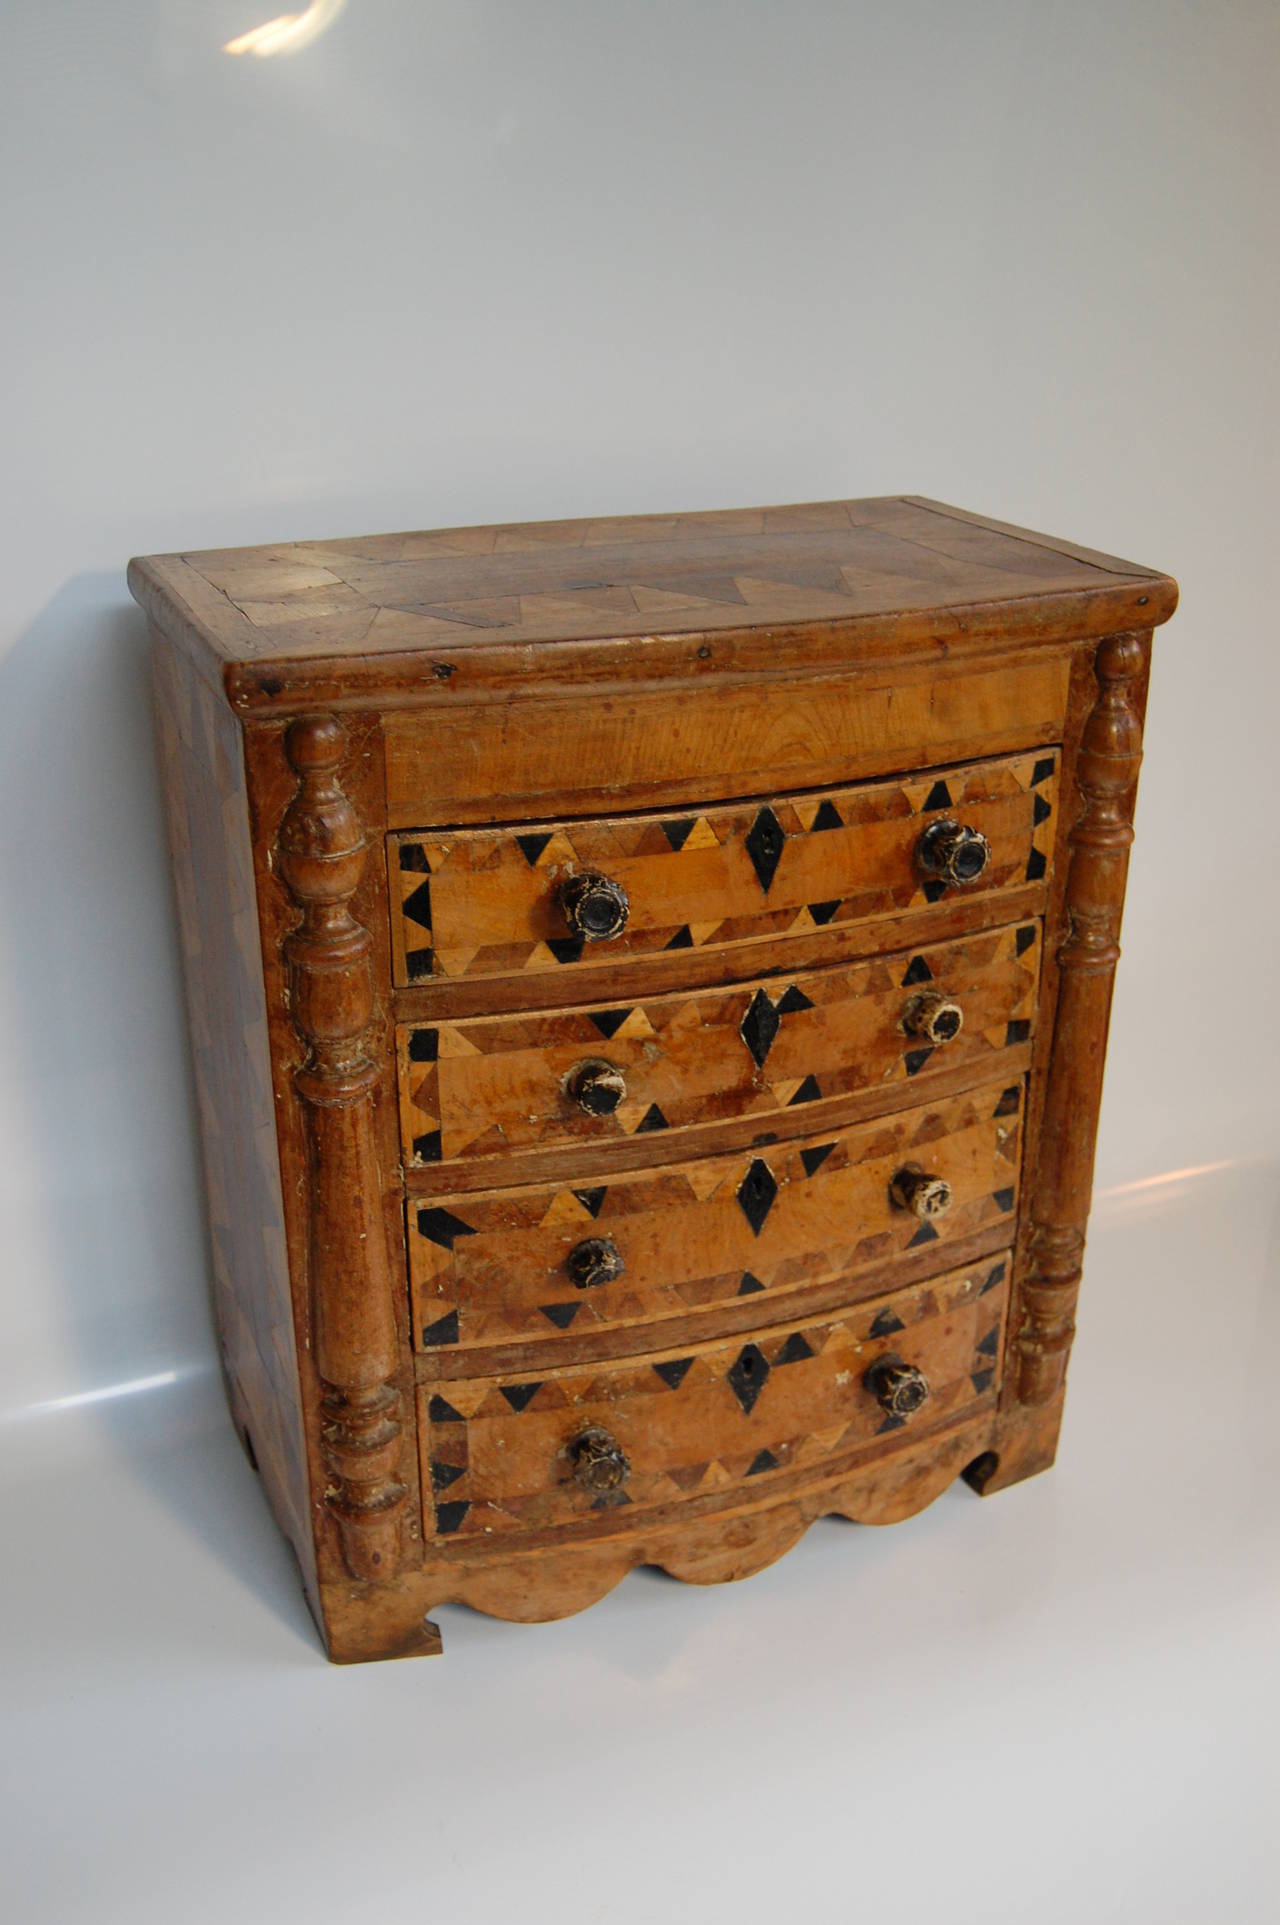 Wonderful American Tramp Art chest of drawers. Solid-end and bow fronted case fitted with four conforming drawers and parquetry inlaid. Three of the original glass knobs have replacement wooden knobs and one glass knob has a section missing. The